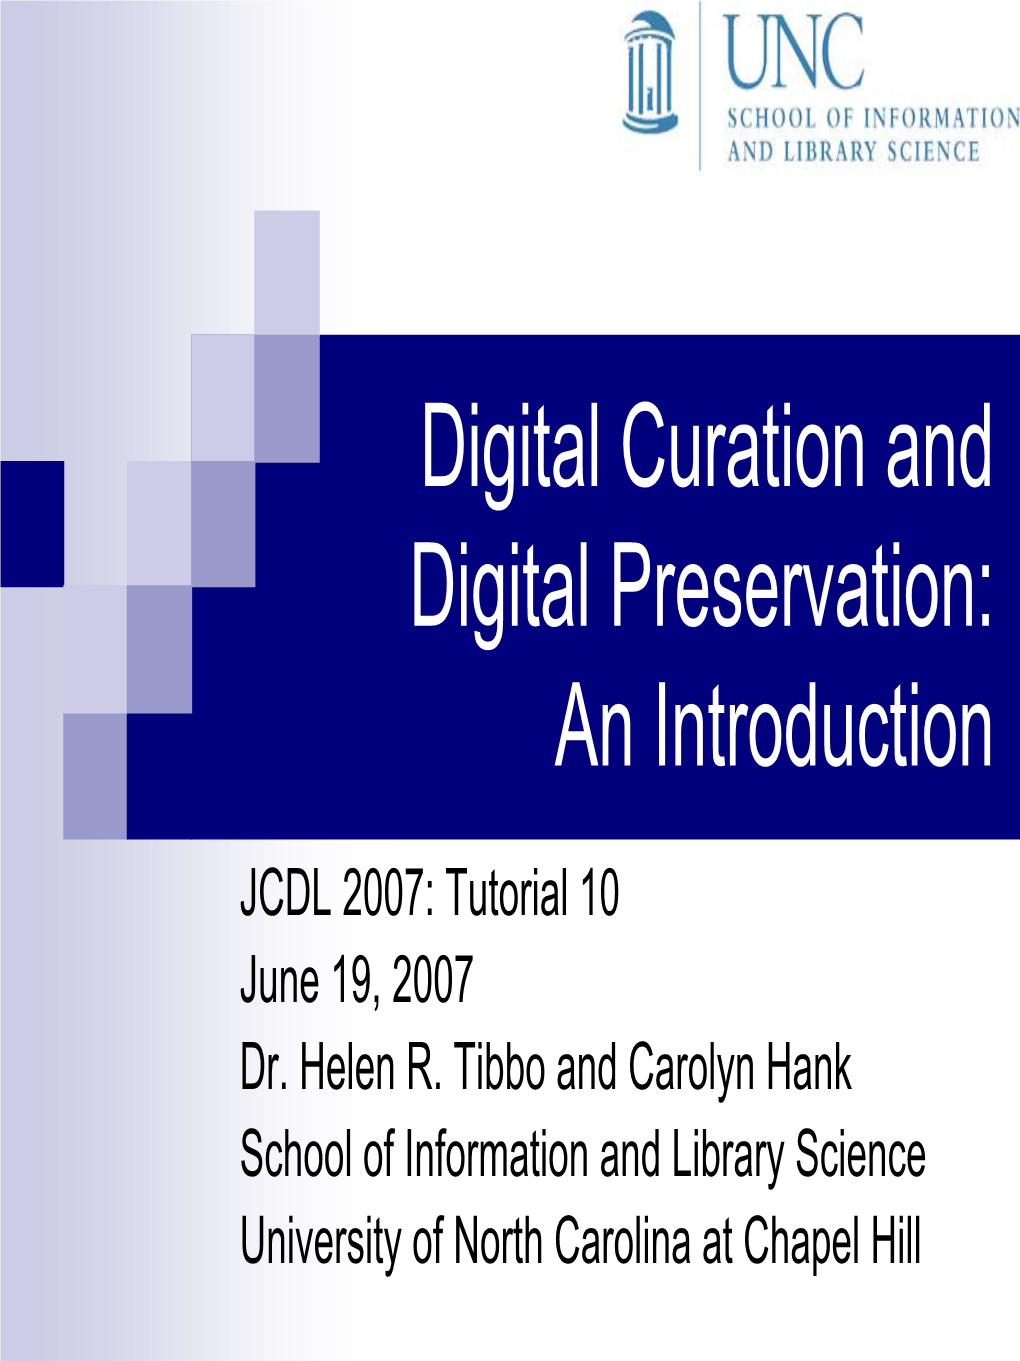 Digital Curation and Digital Preservation: an Introduction